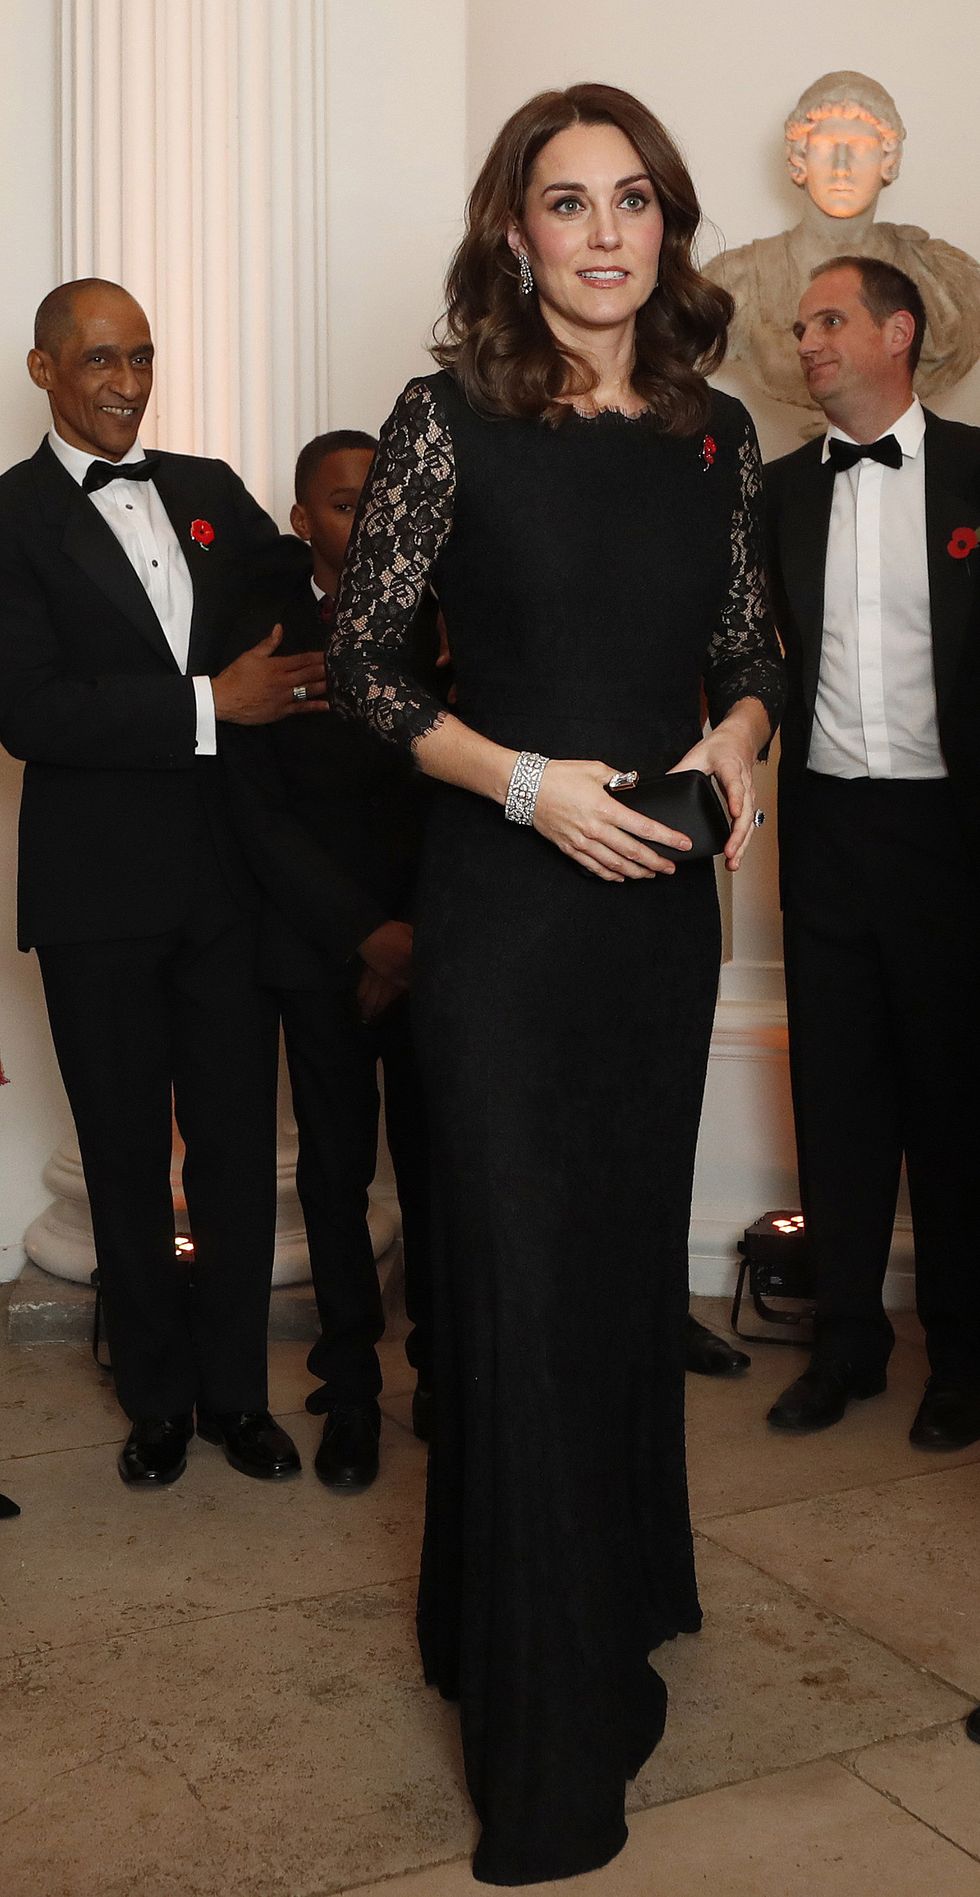 05-arrives-at-the-2017-gala-dinner-for-the-anna-freud-national-centre-for-children-and-families-afnccf-at-kensington-palace-on-november-7-2017-in-london-england-1523224501.jpg